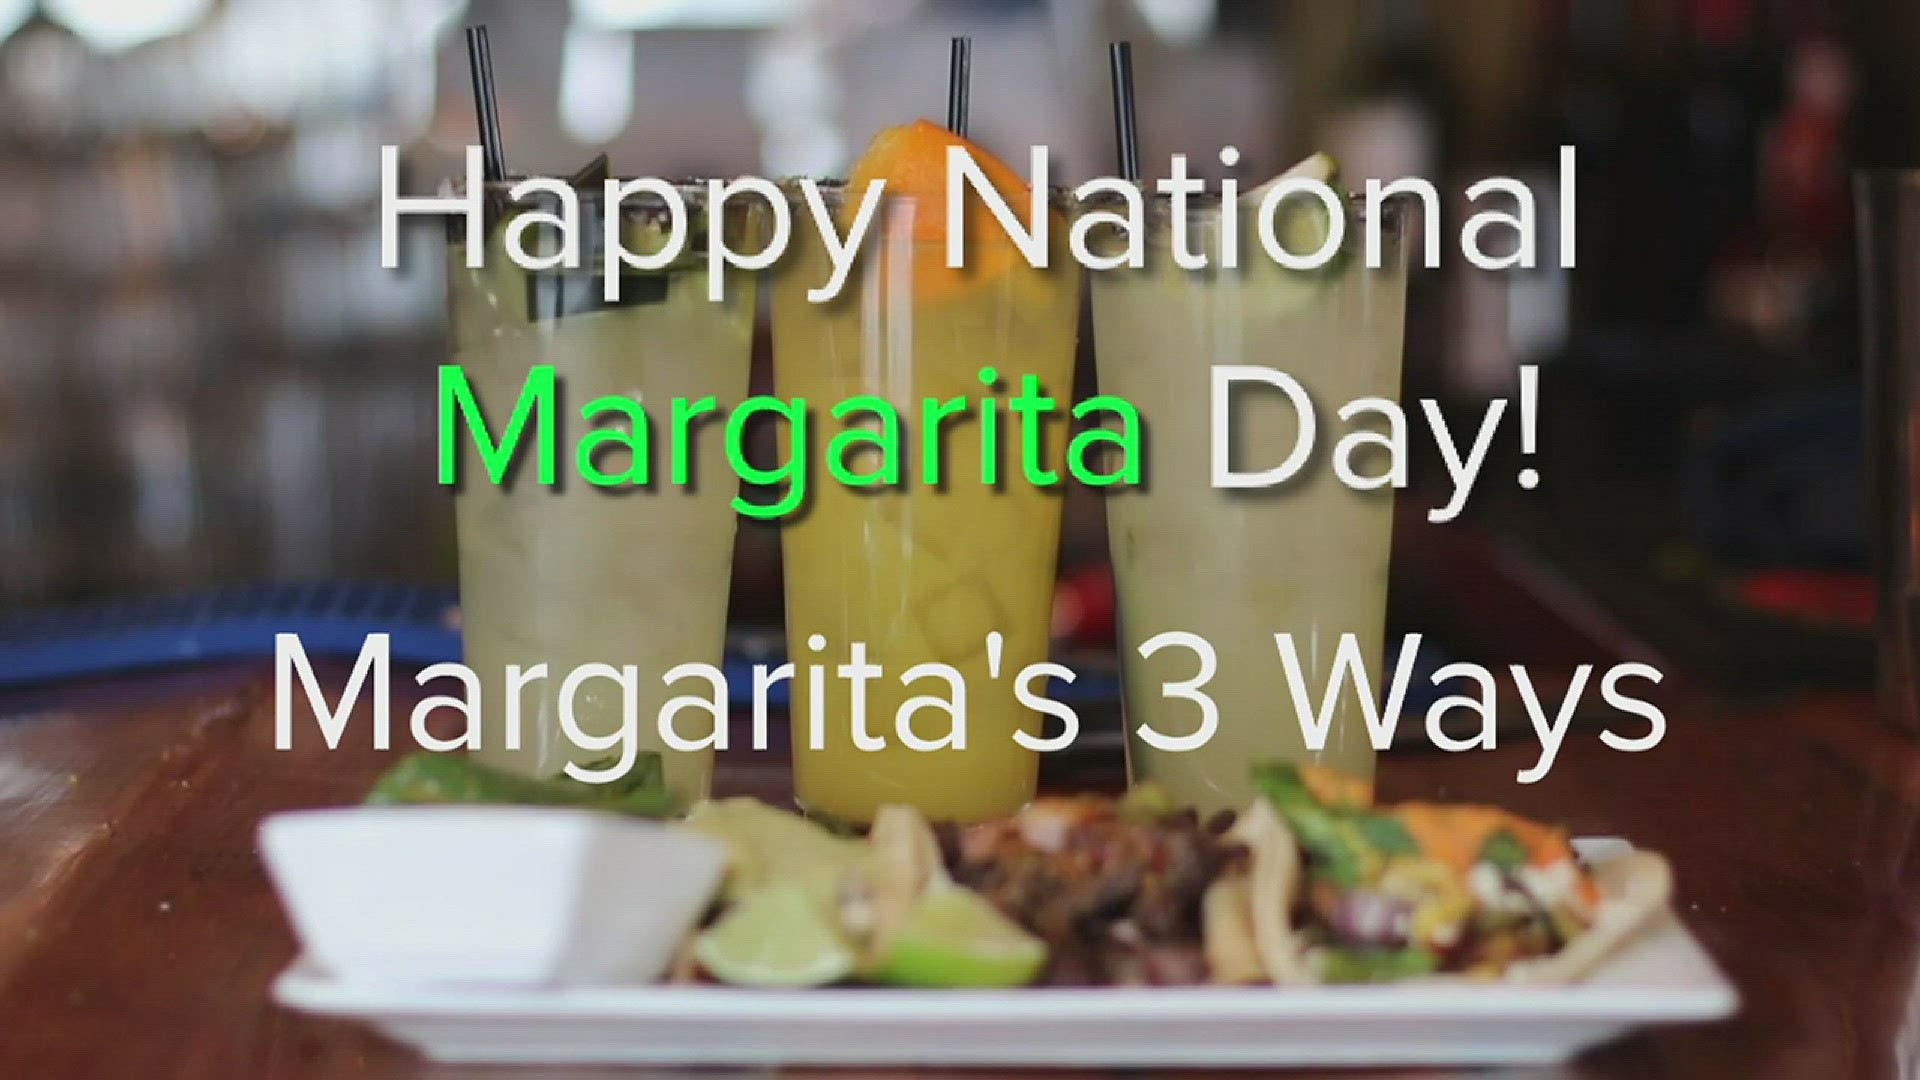 Nico's Taco and Tequila Bar in Minneapolis shares some recipes for your National Margarita Day celebration!